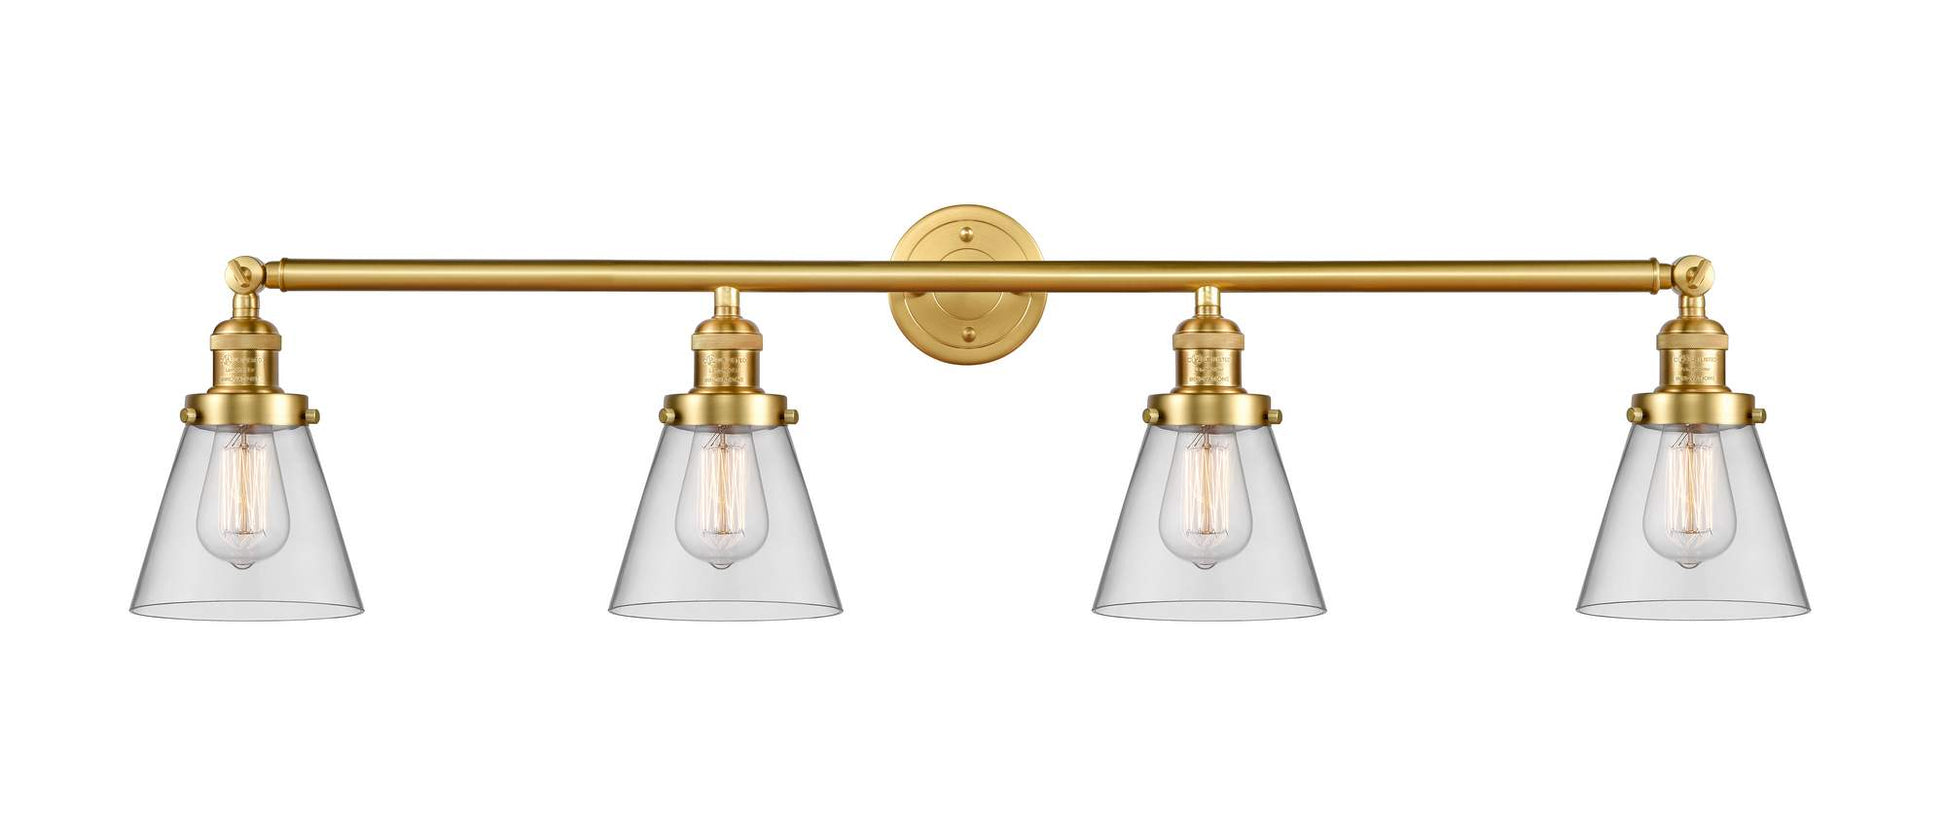 215-SG-G62 4-Light 42.25" Satin Gold Bath Vanity Light - Clear Small Cone Glass - LED Bulb - Dimmensions: 42.25 x 7.625 x 9.75 - Glass Up or Down: Yes